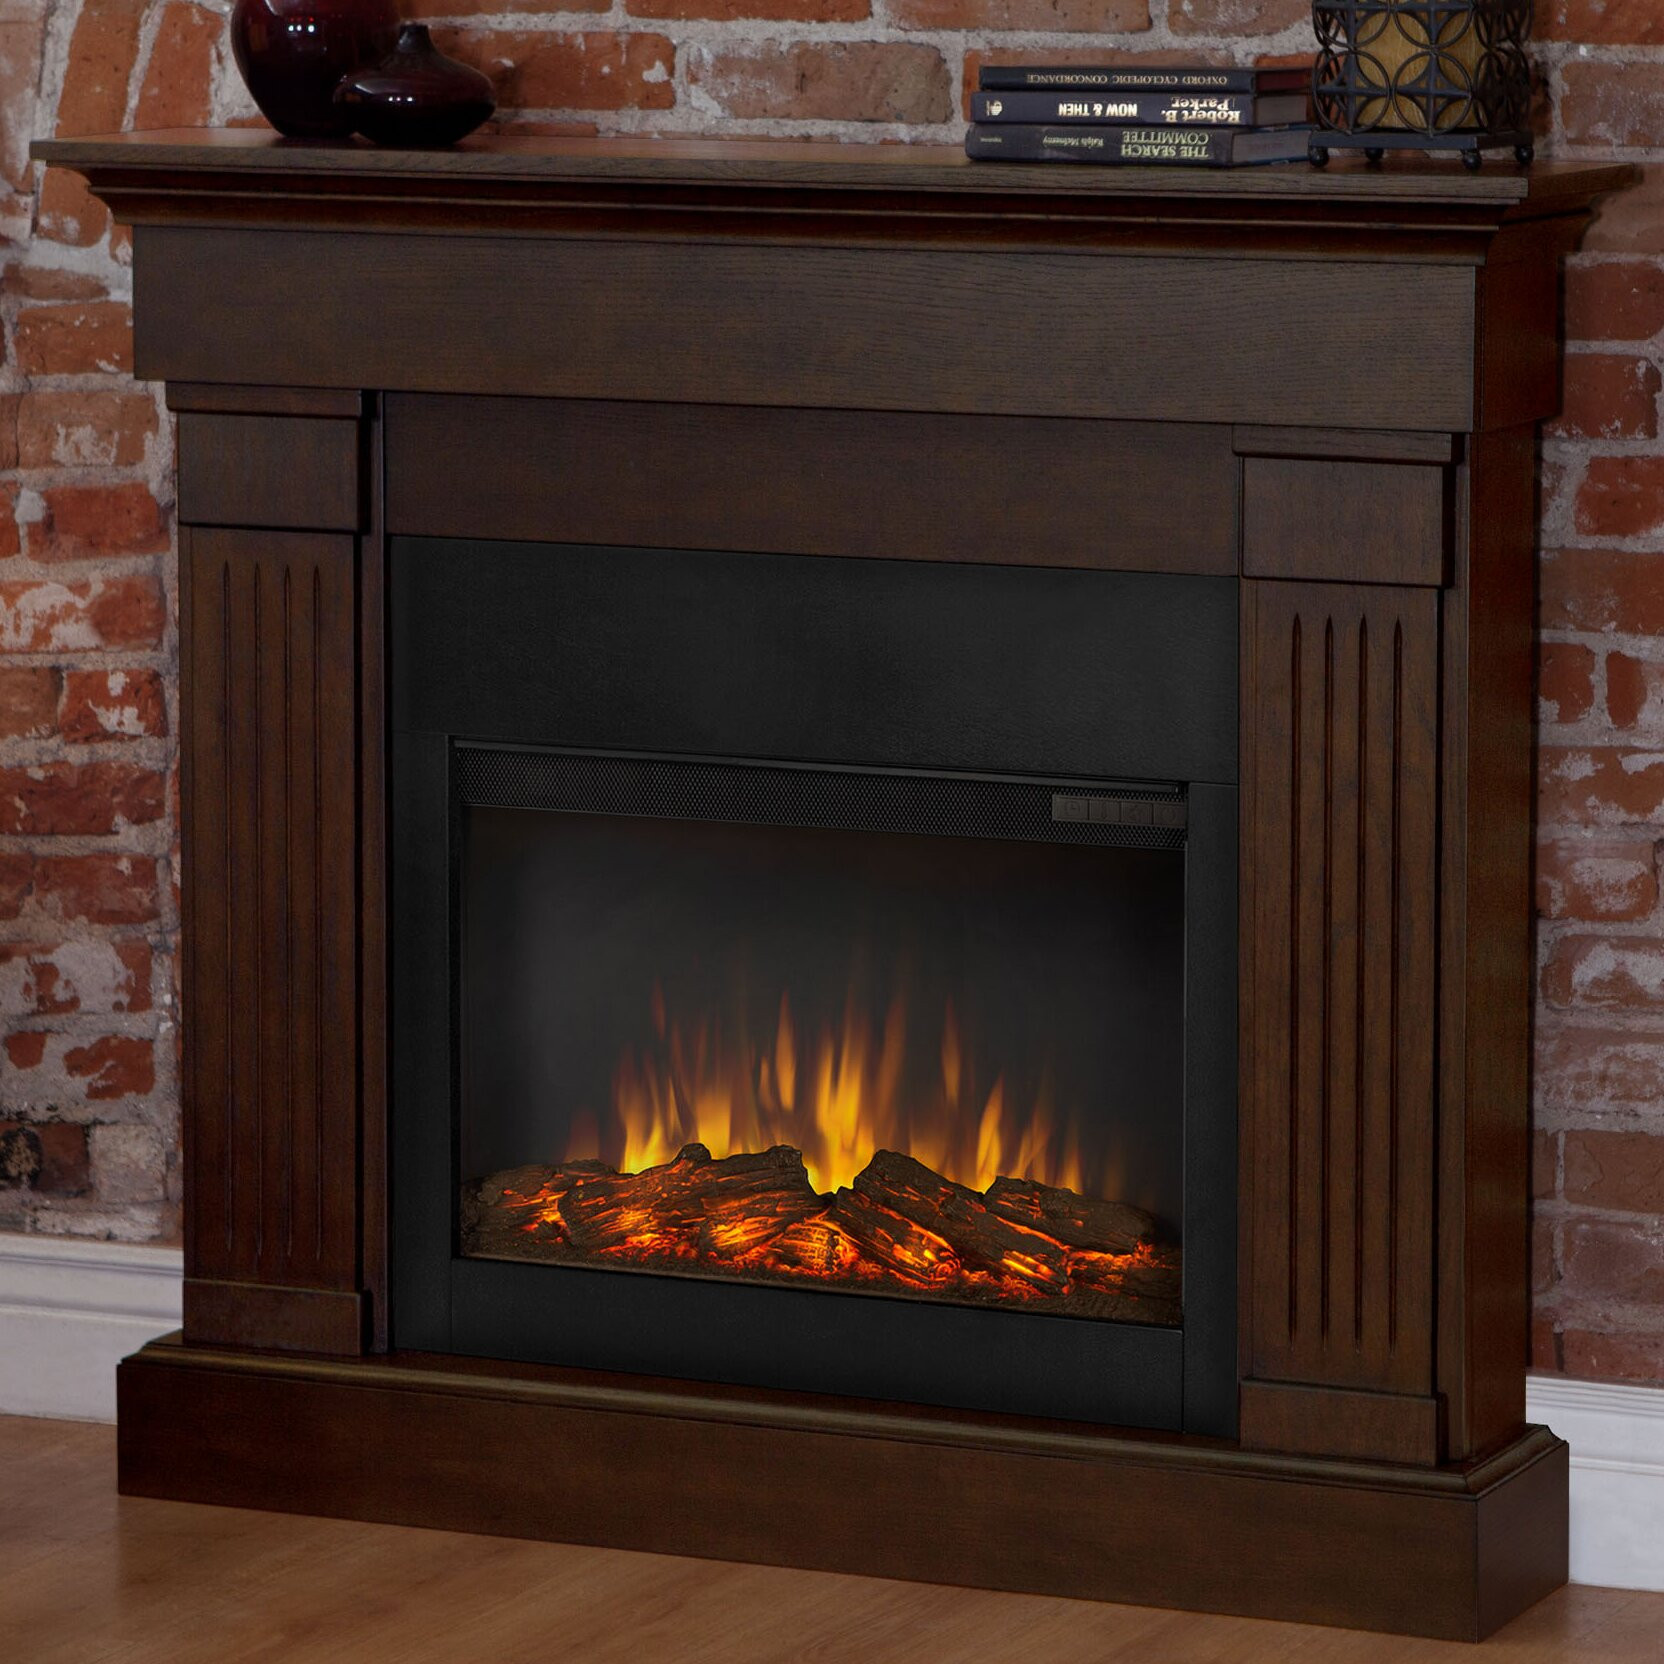 Wall Hung Electric Fireplace
 Real Flame Slim Crawford Wall Mounted Electric Fireplace